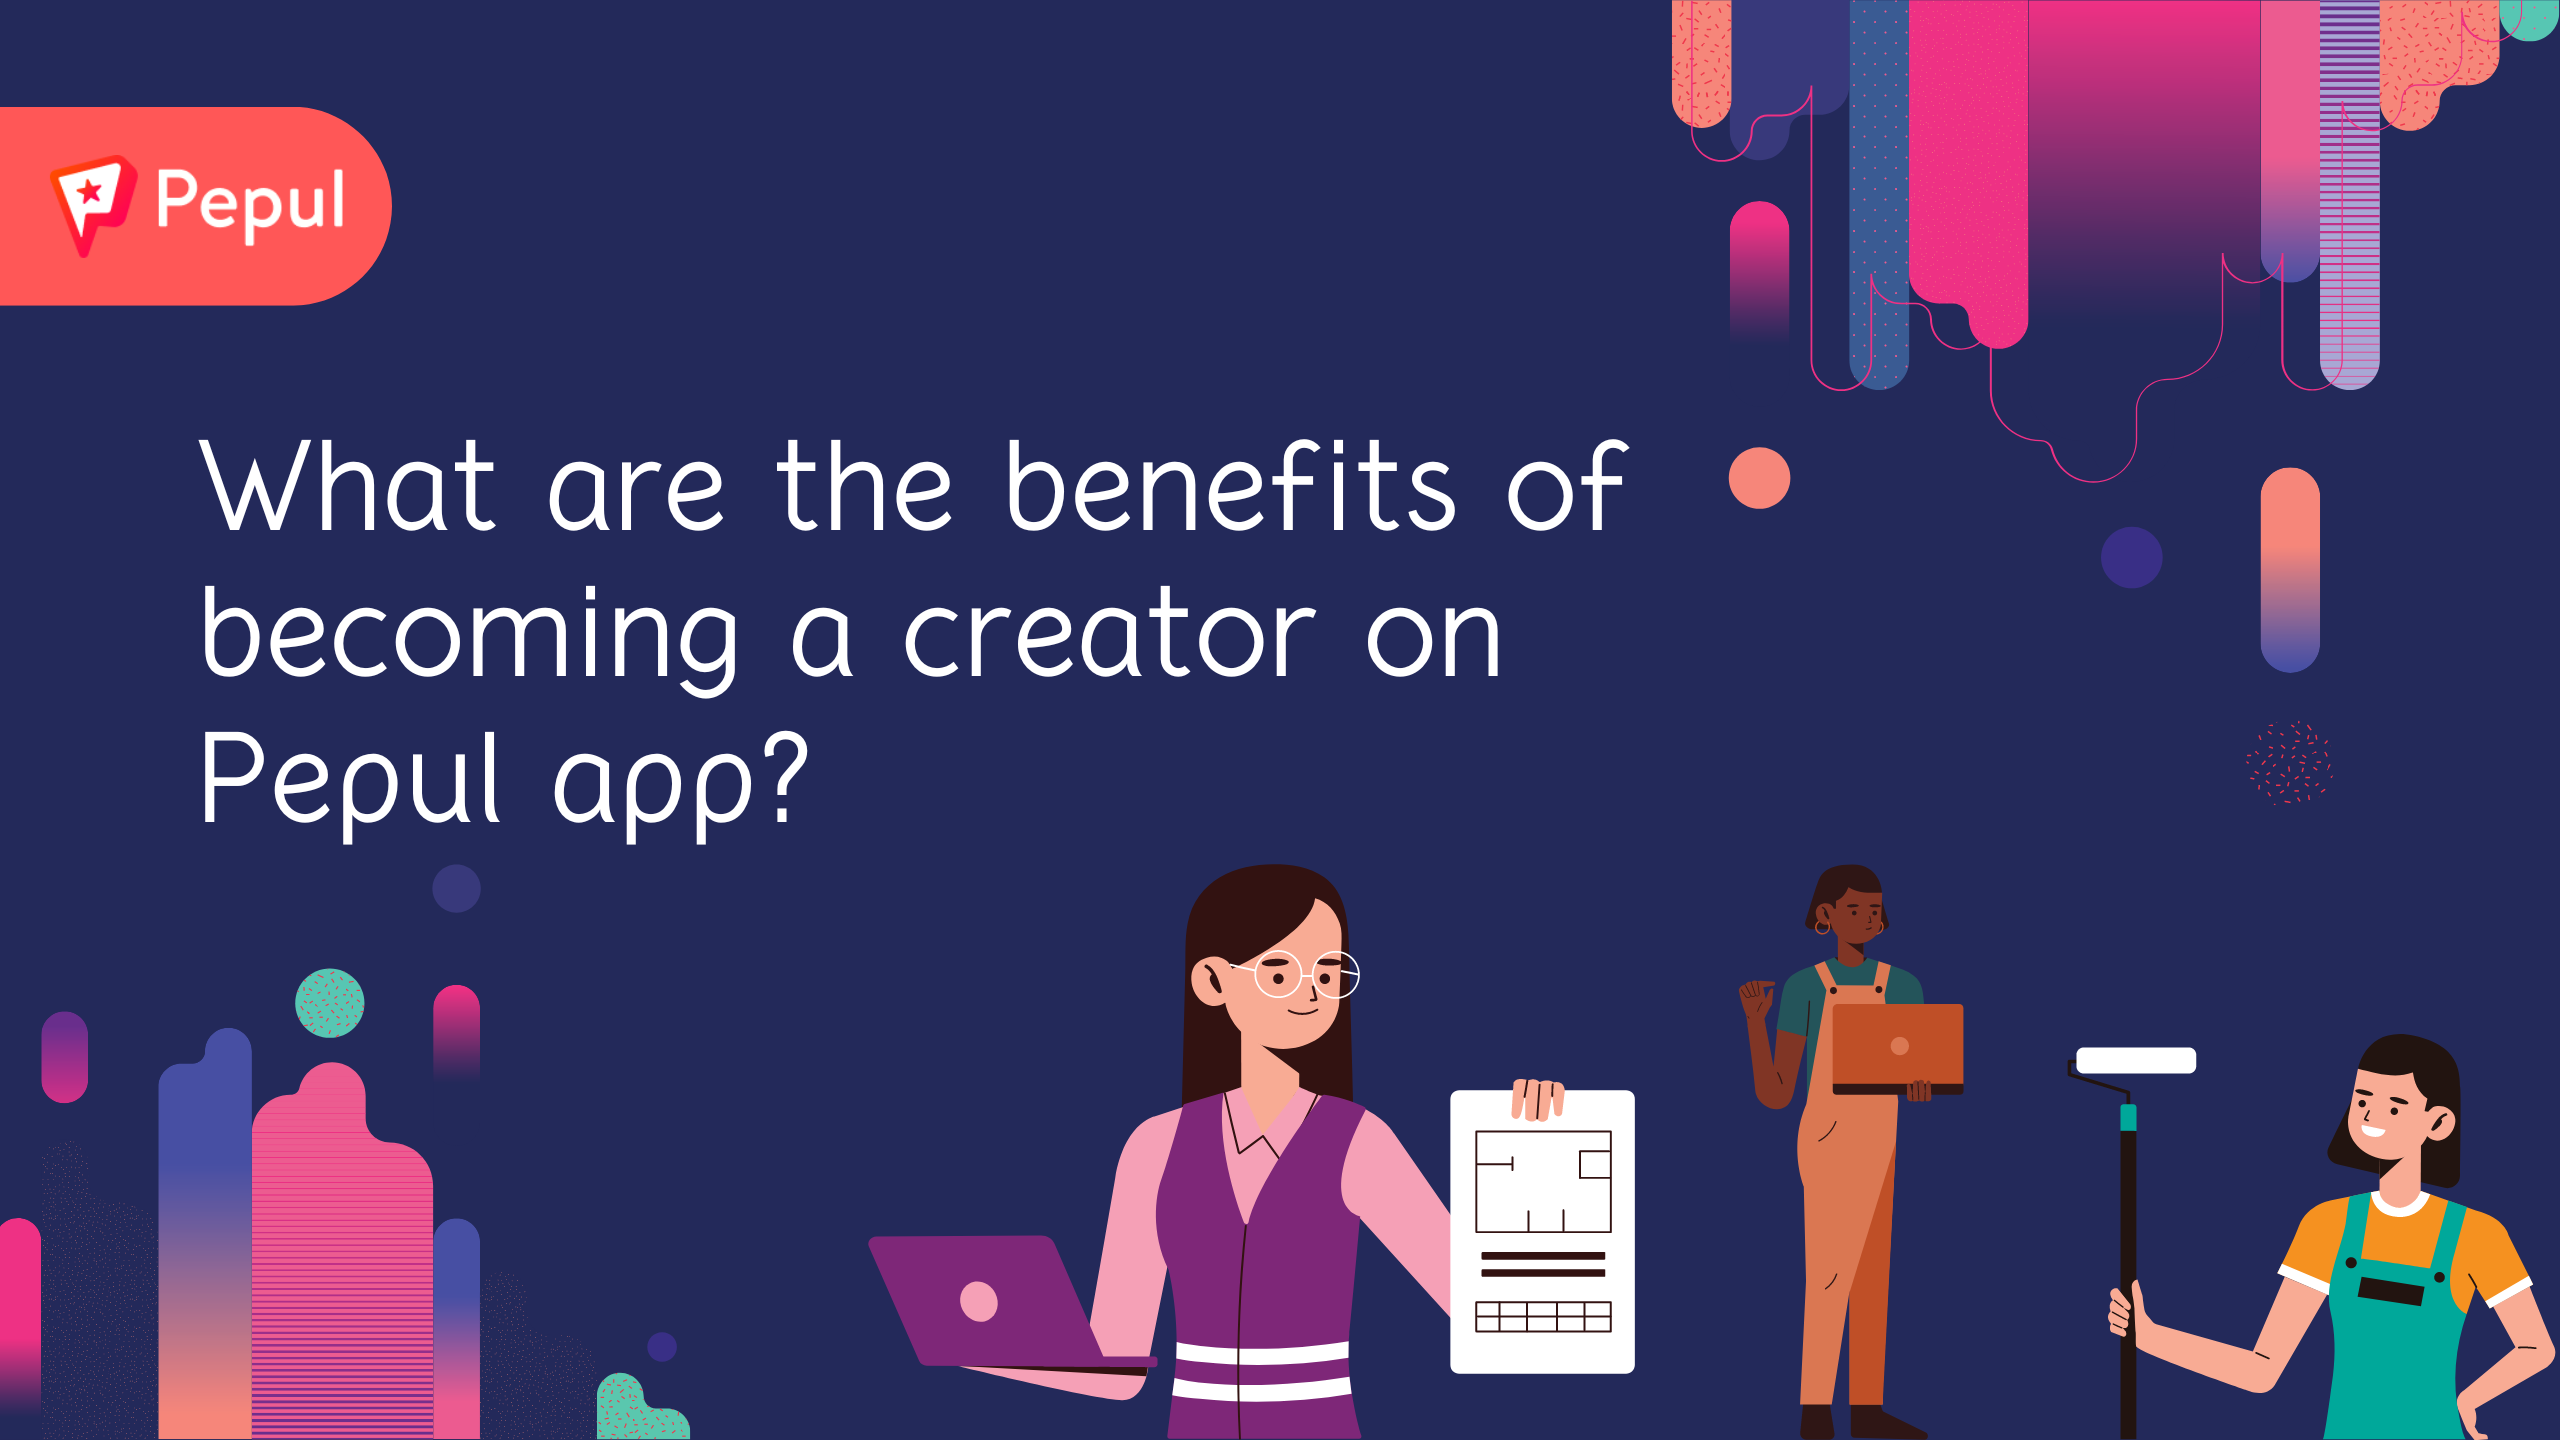 What are the Benefits of becoming a Creator on Pepul app?